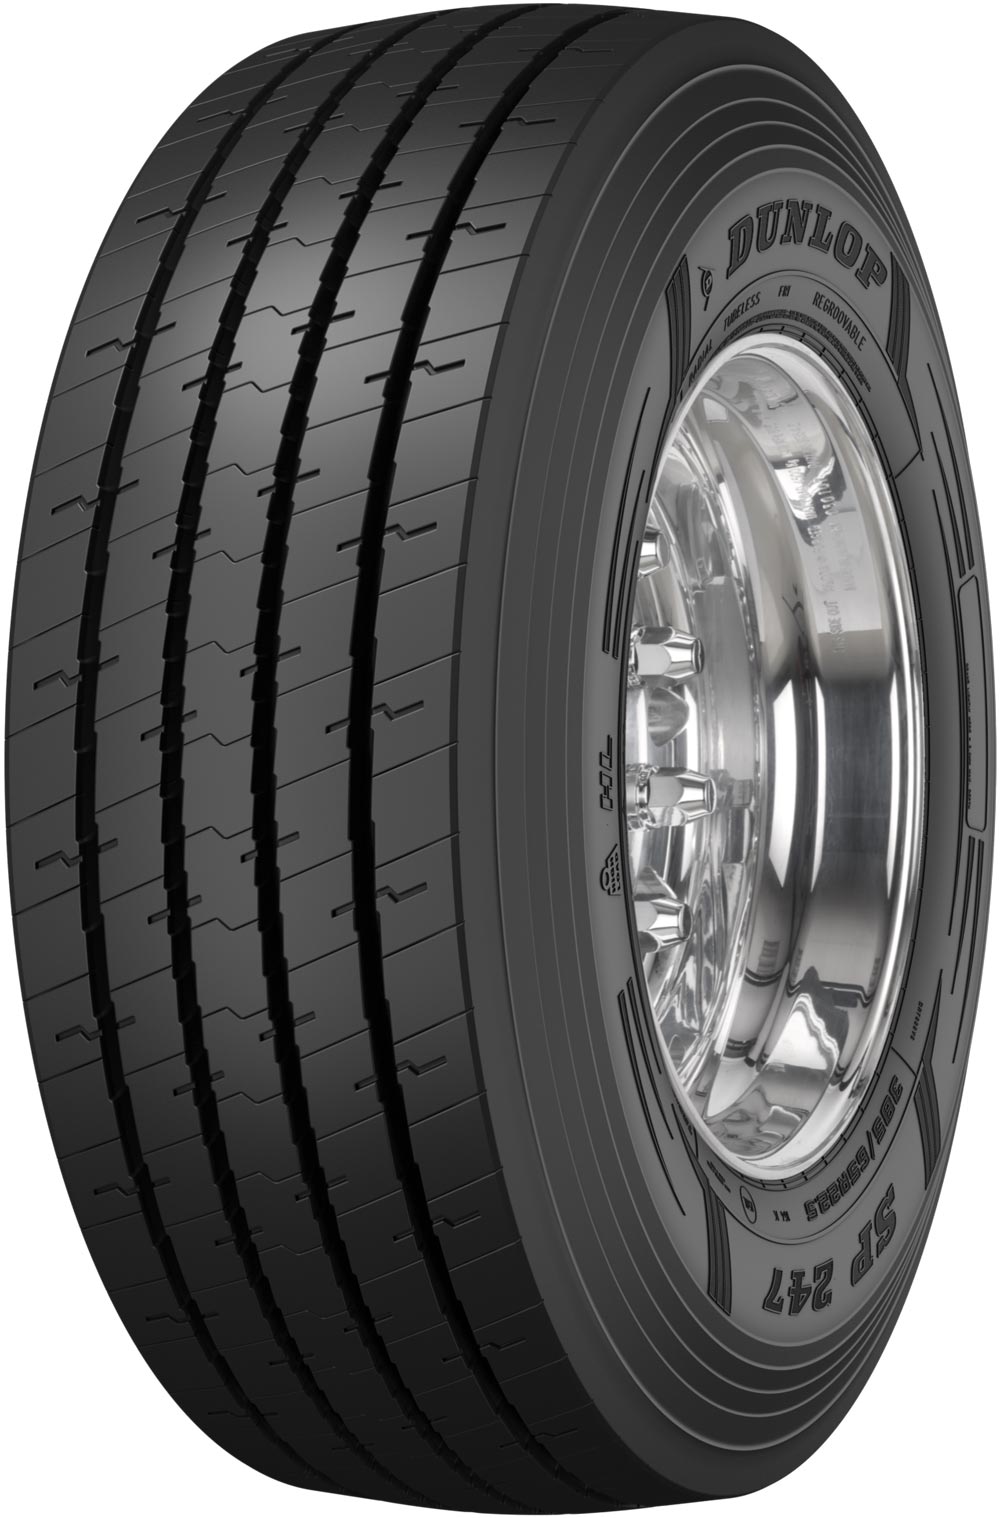 product_type-heavy_tires DUNLOP SP247 20 TL 385/65 R22.5 164K